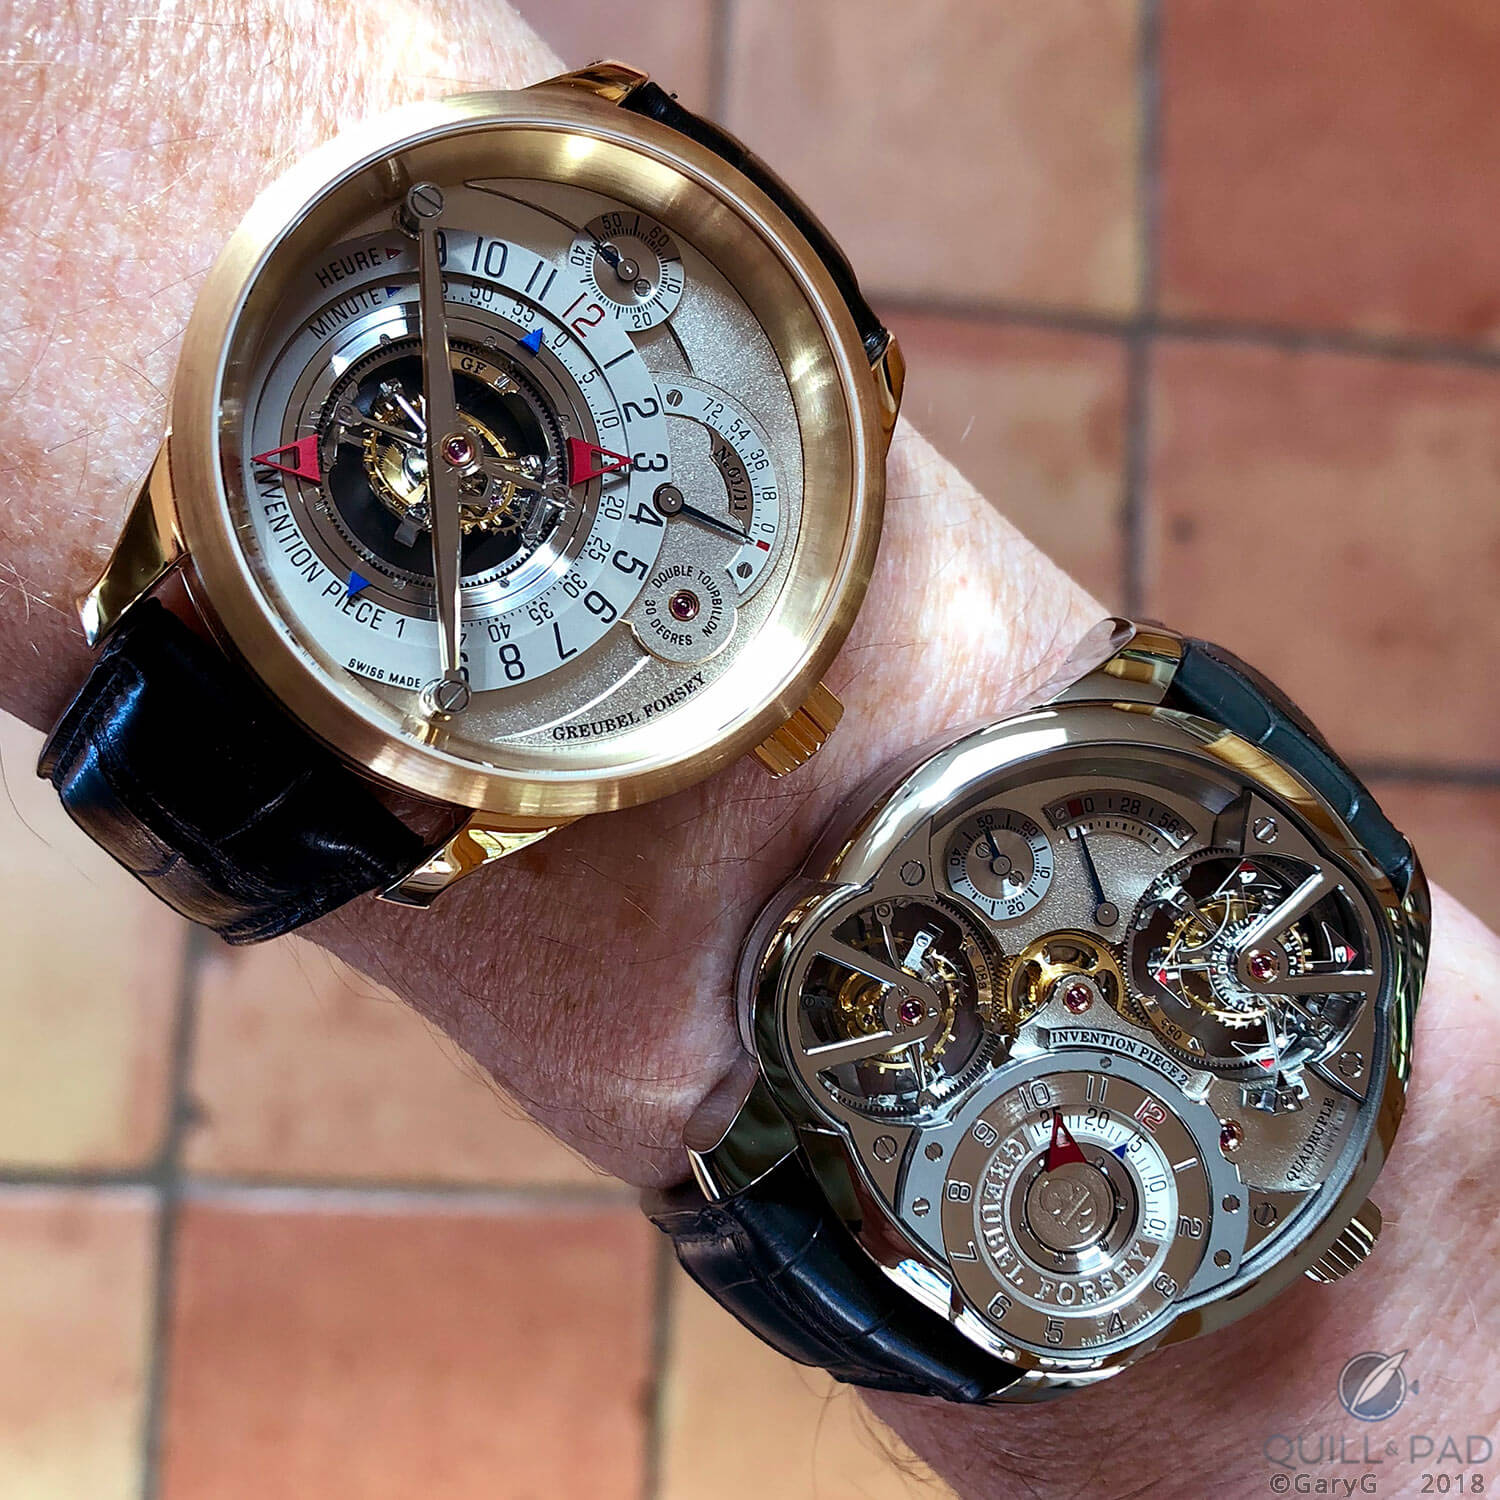 Yes, I did: Greubel Forsey Invention Pieces 1 and 2 on the same wrist